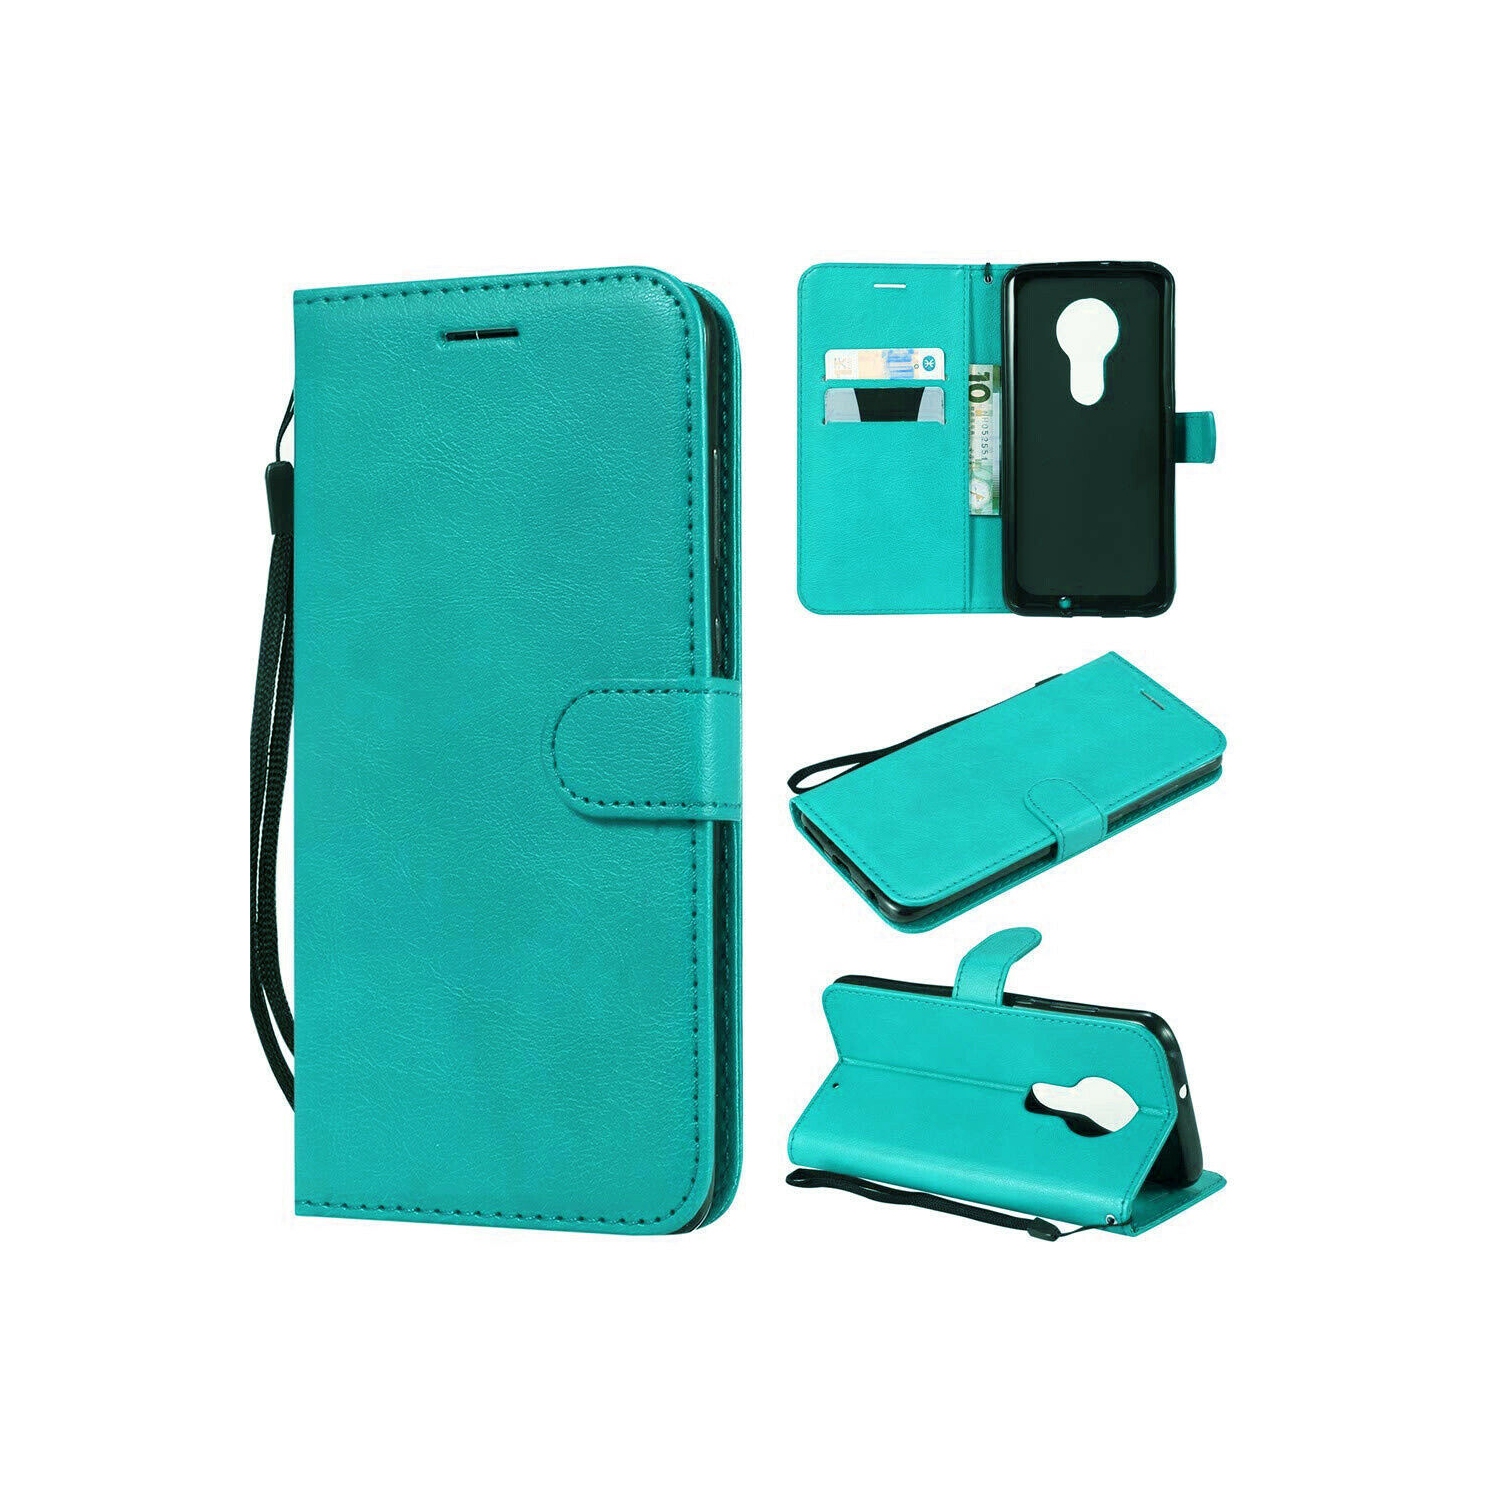 [CS] Motorola Moto G7 Power Case, Magnetic Leather Folio Wallet Flip Case Cover with Card Slot, Teal